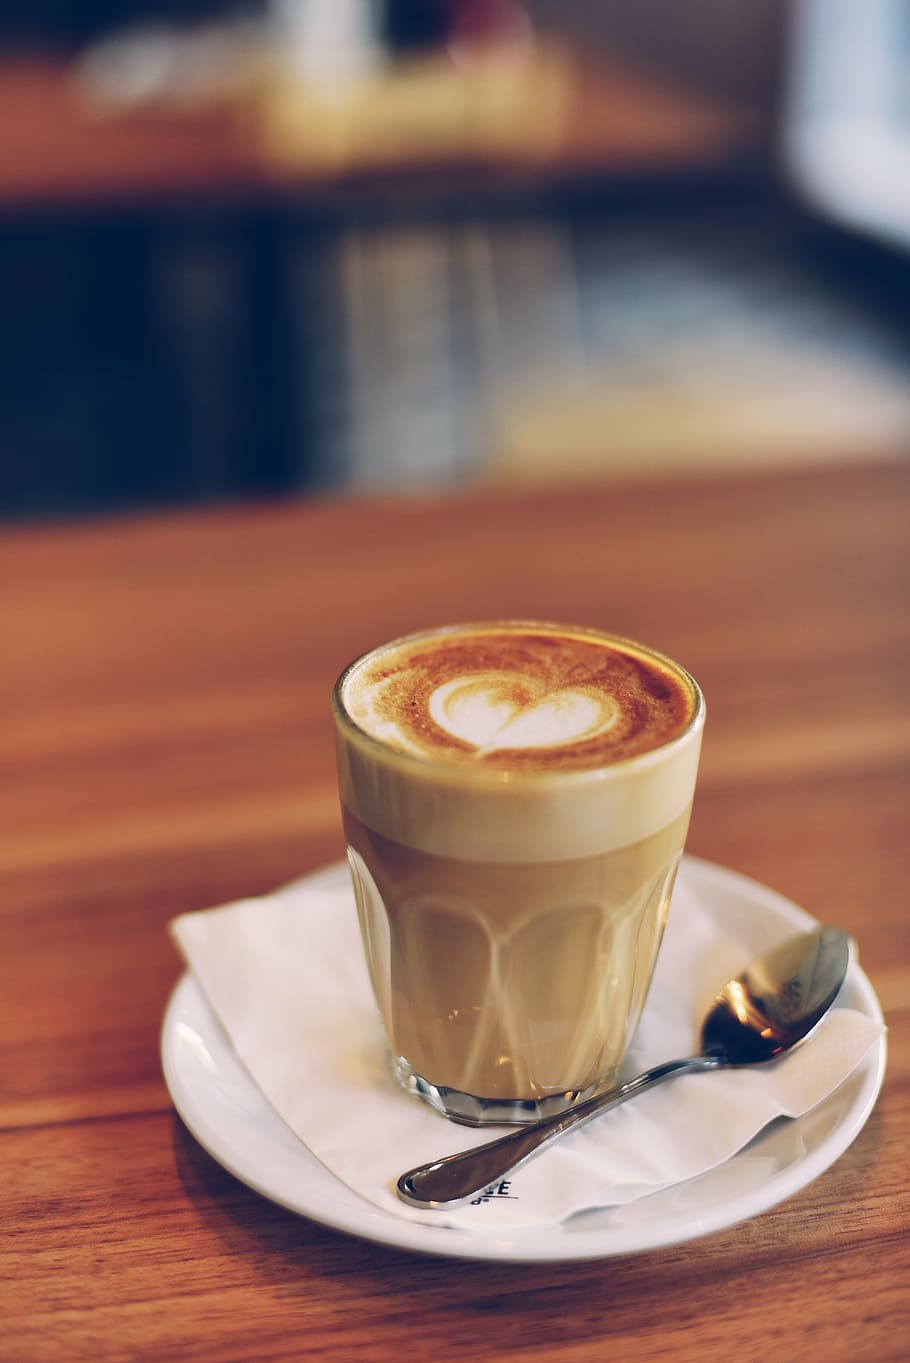 selective, focus photo, glass, latte, white, saucer, coffee, cafe, wood, hot